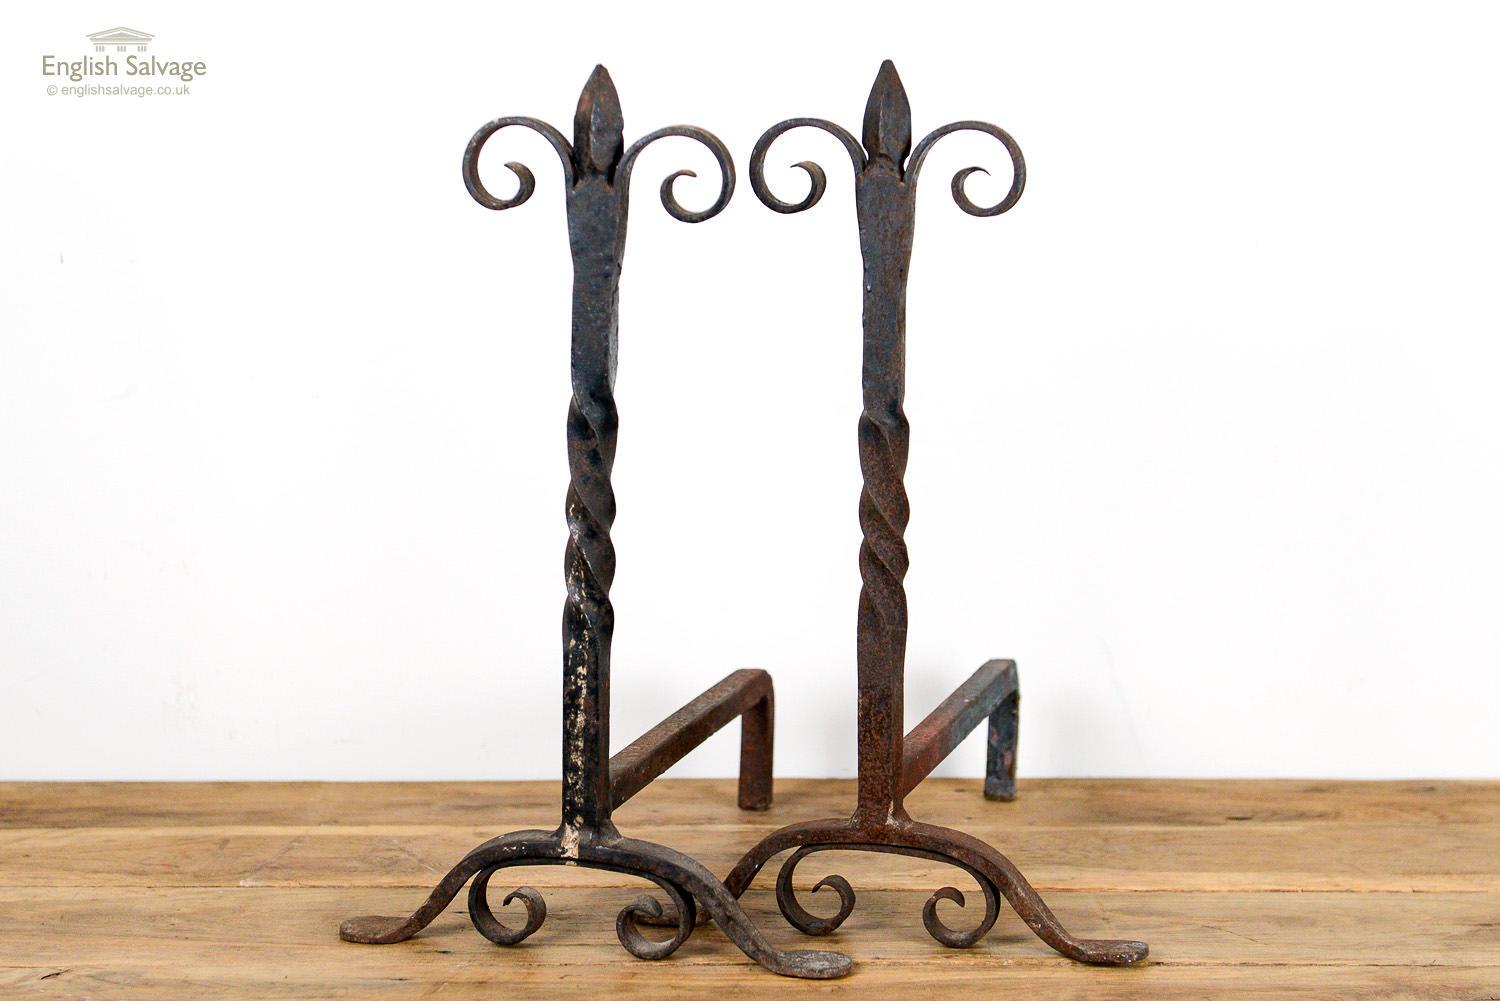 Robust pair of antique wrought iron firedogs. The simple twist and scroll design with arrowhead top is enhanced by the patina formed of surface rust.